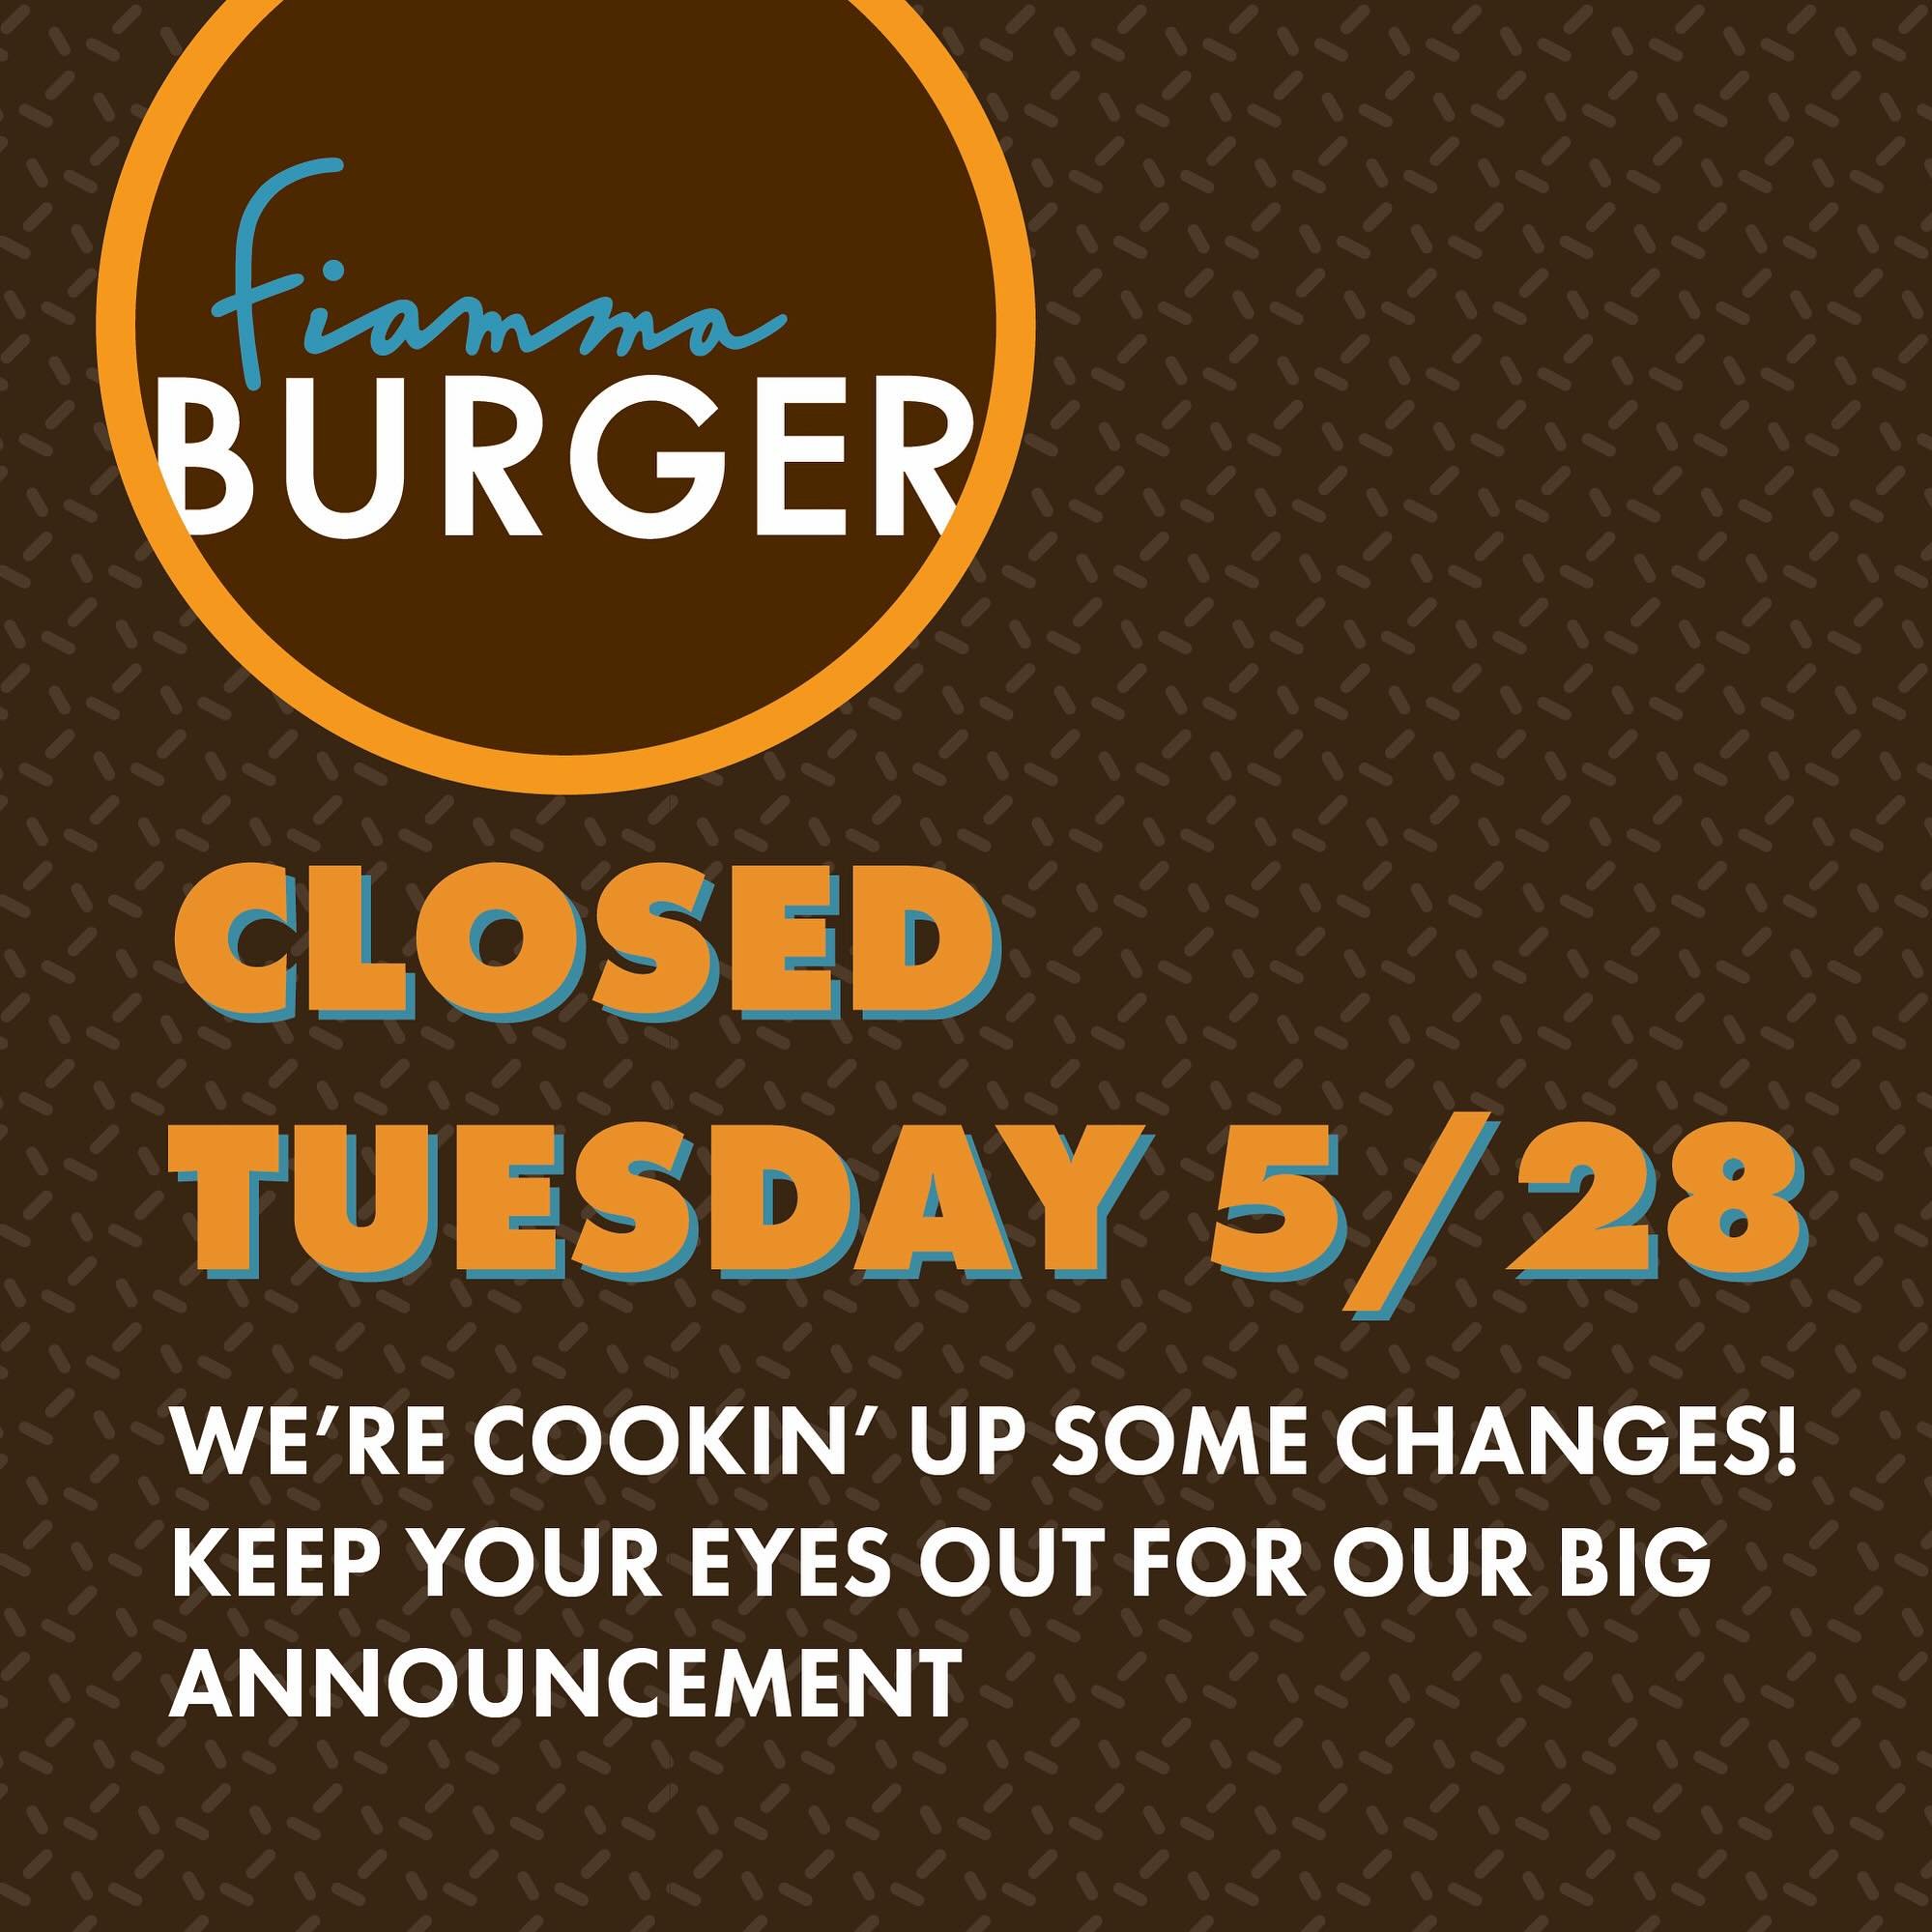 We&rsquo;re closed all day today (Tue 5/28) to wrap up some changes we&rsquo;ve been cooking up! We&rsquo;ll be back to regular hours tomorrow and we&rsquo;re super stoked to show you what we&rsquo;ve been working on 🍔 
See ya soon!